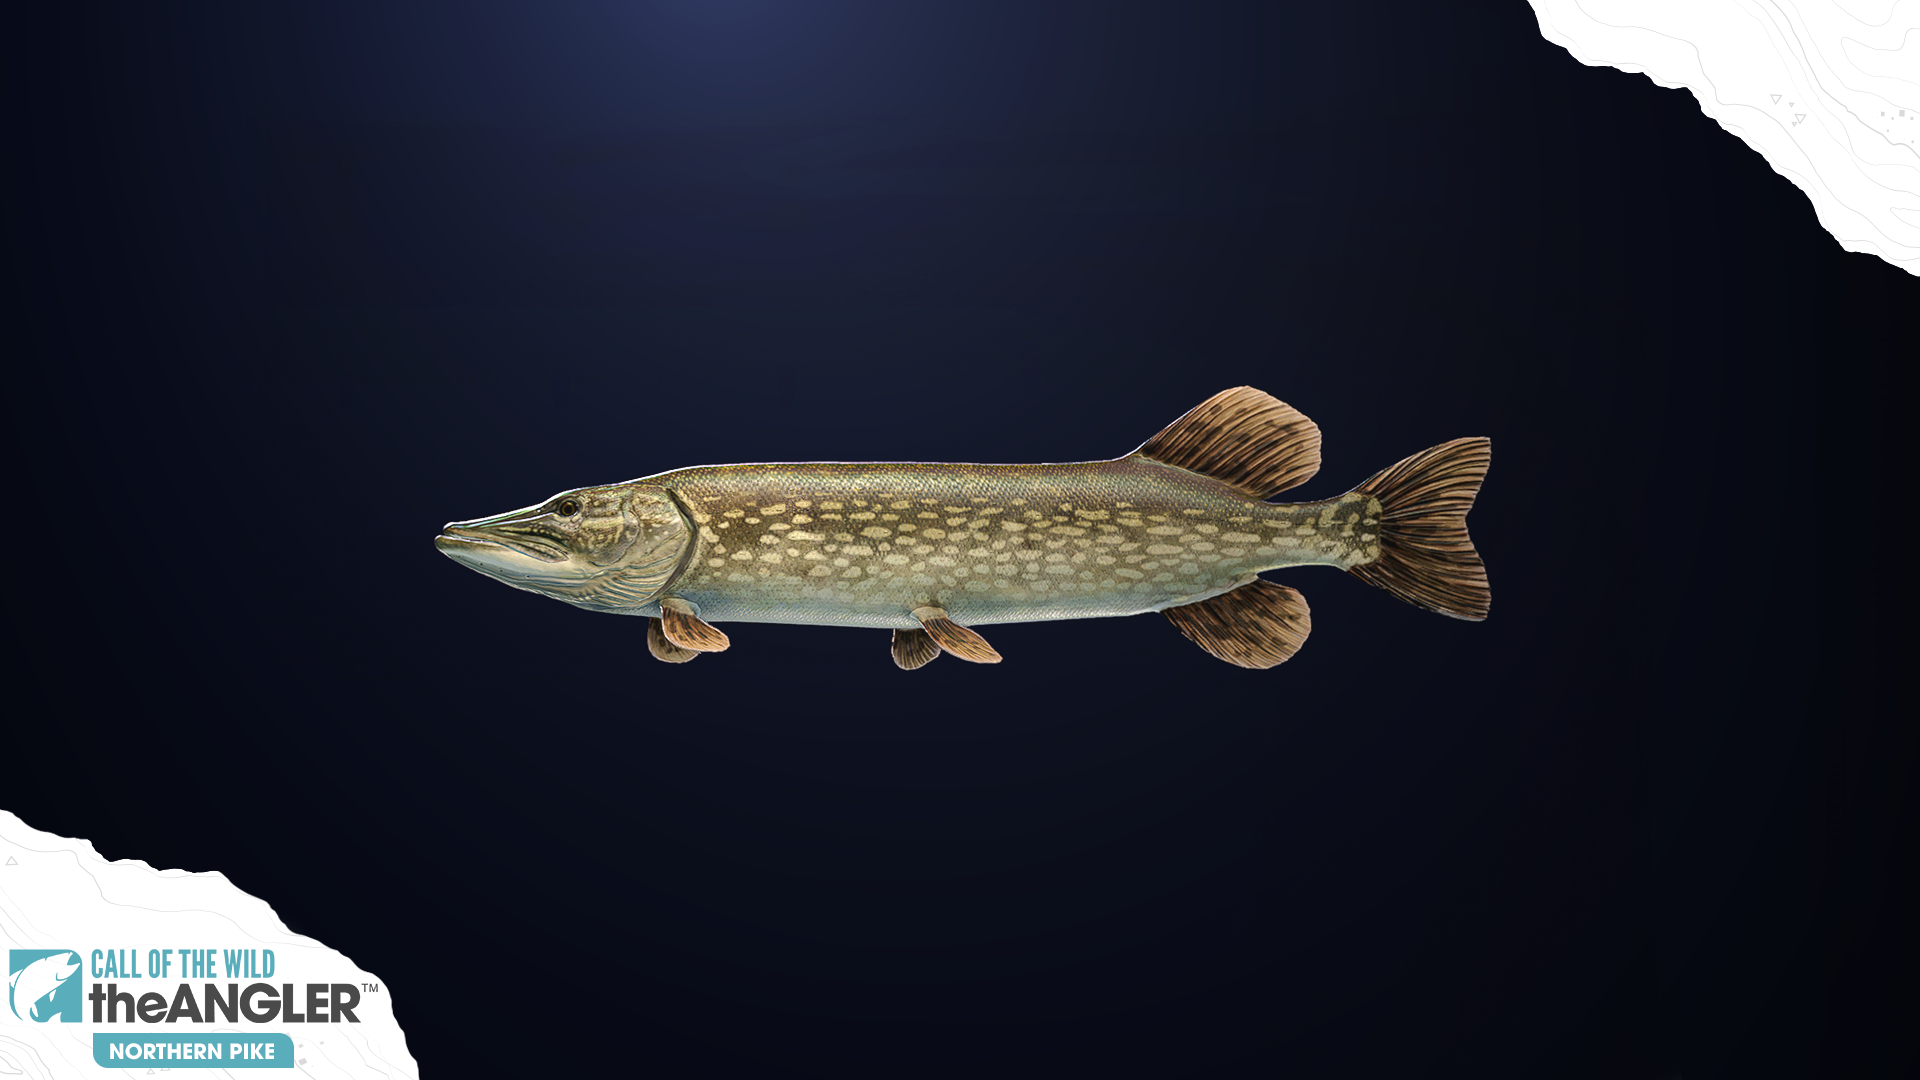 An image of the fish species, Northern Pike.